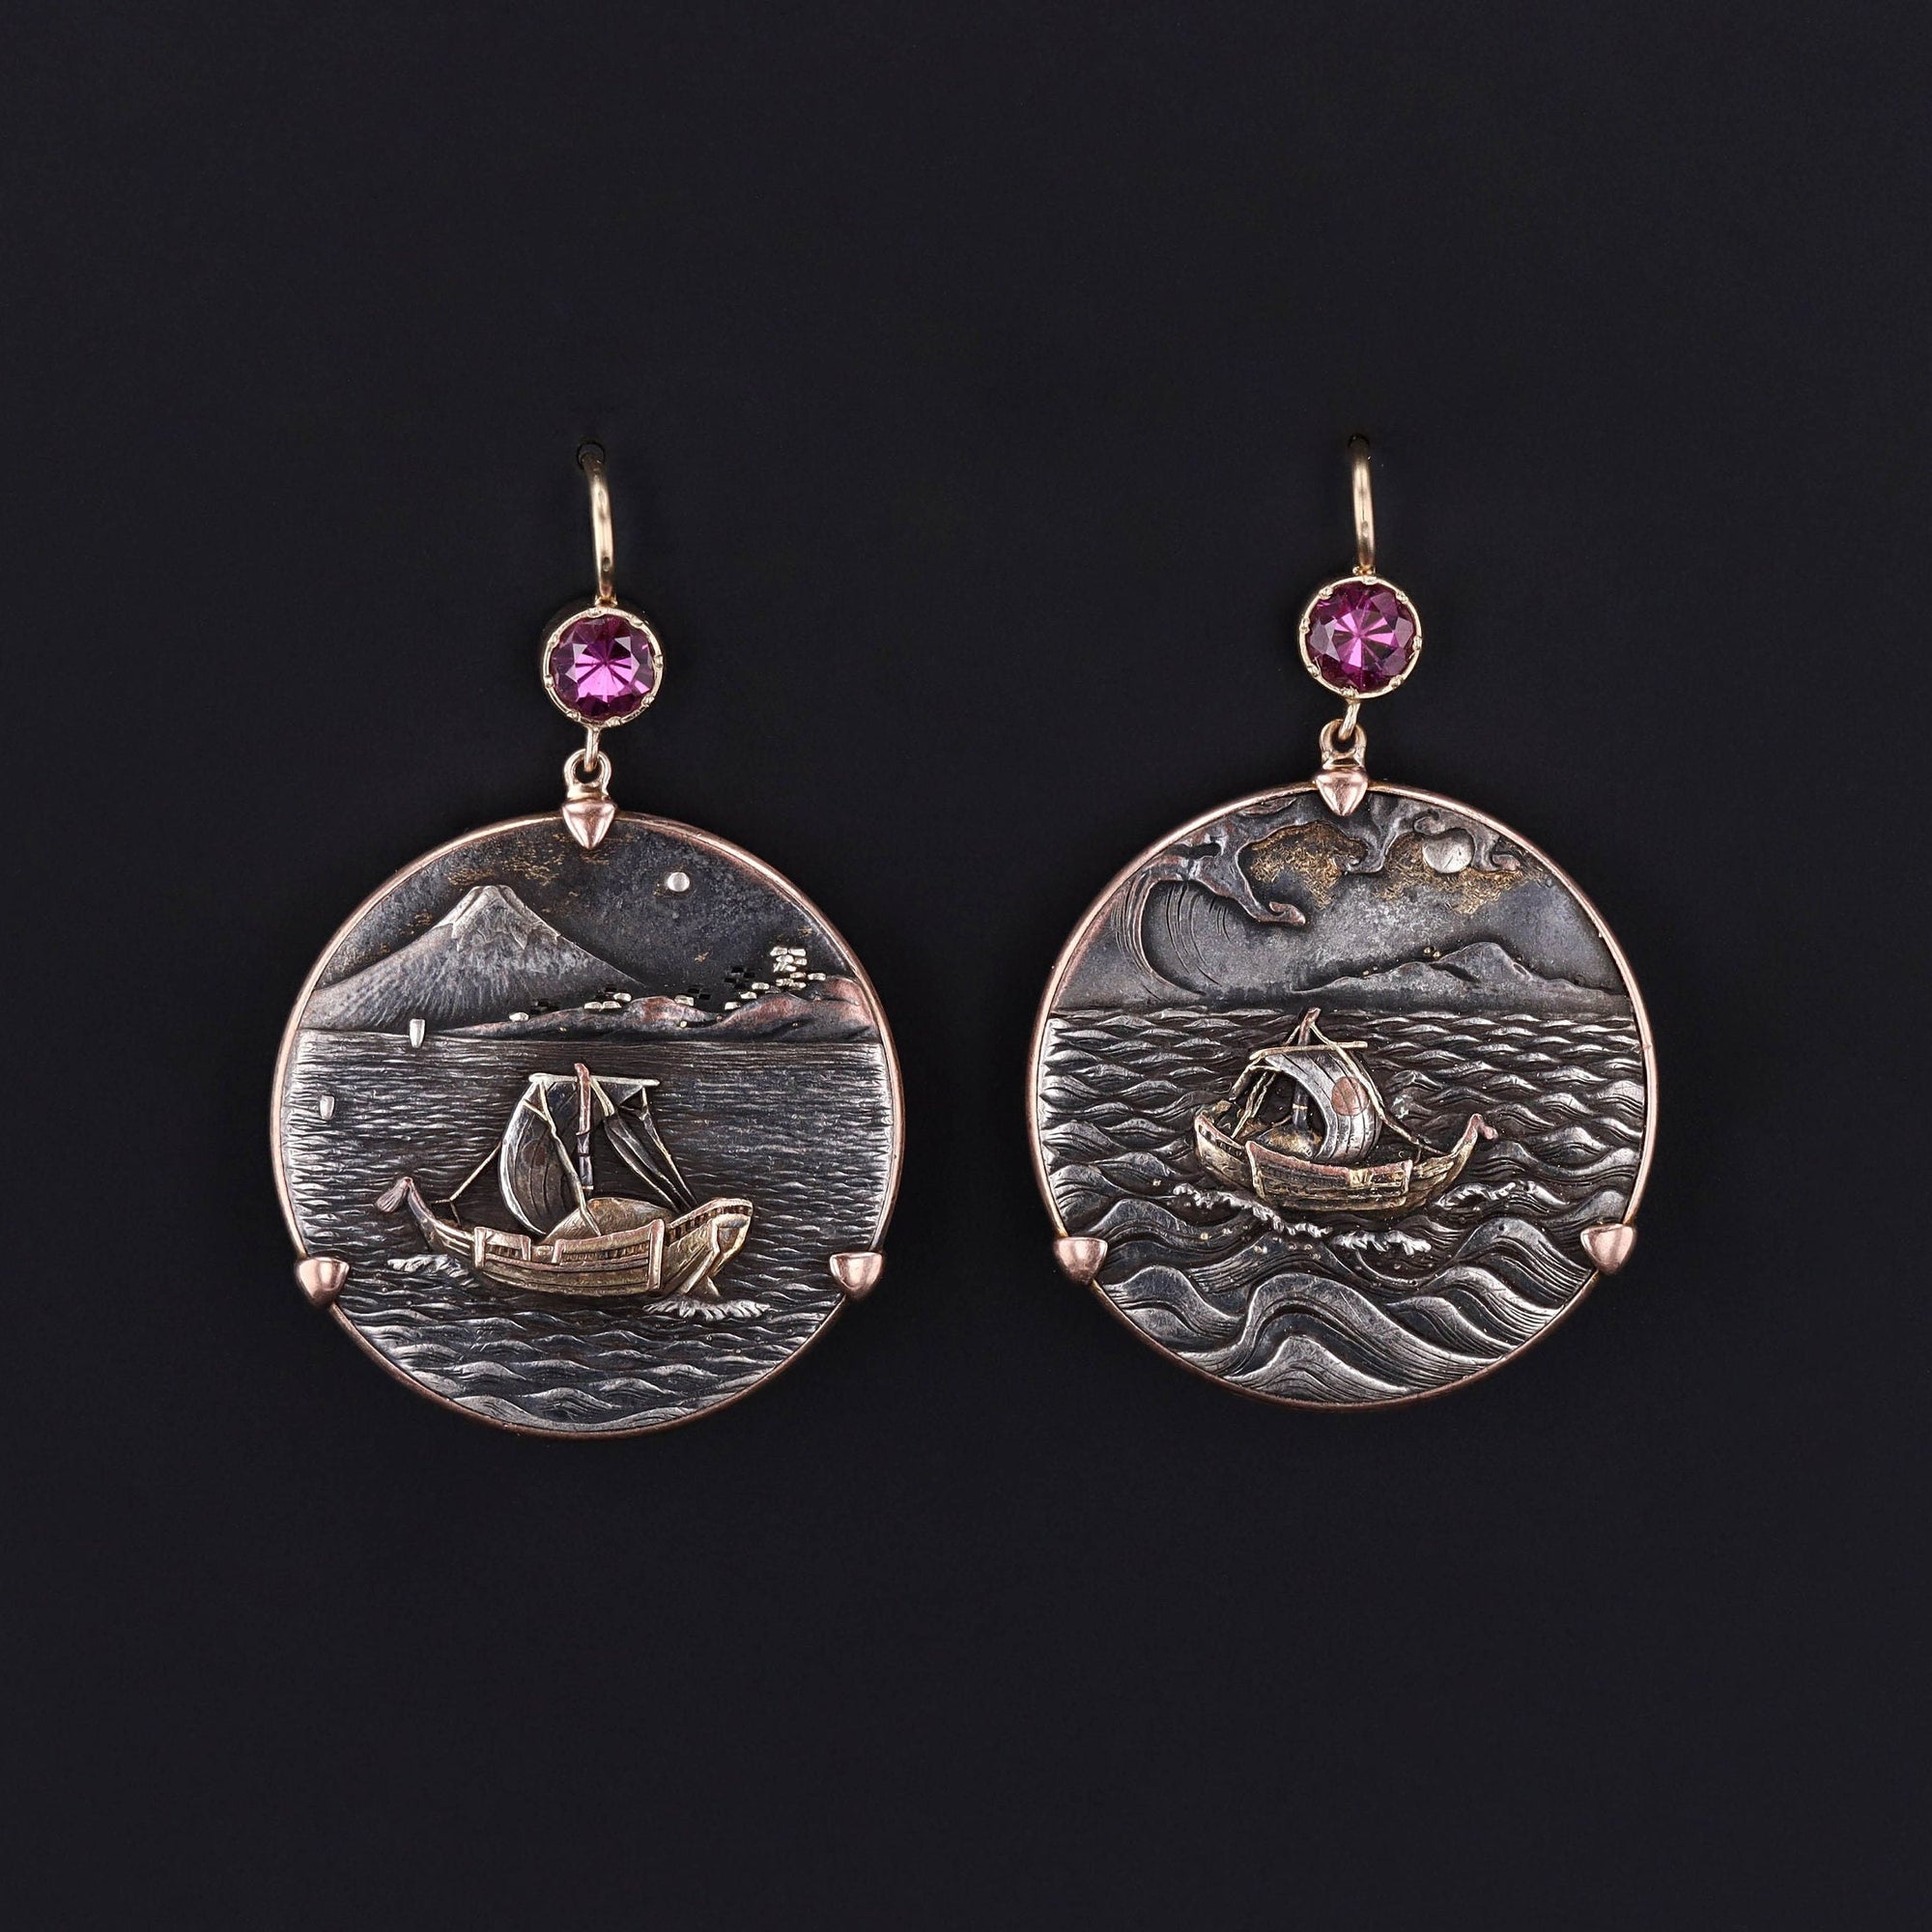 Antique Shakudo Ship Earrings set in 14k Gold with Pink Tourmaline